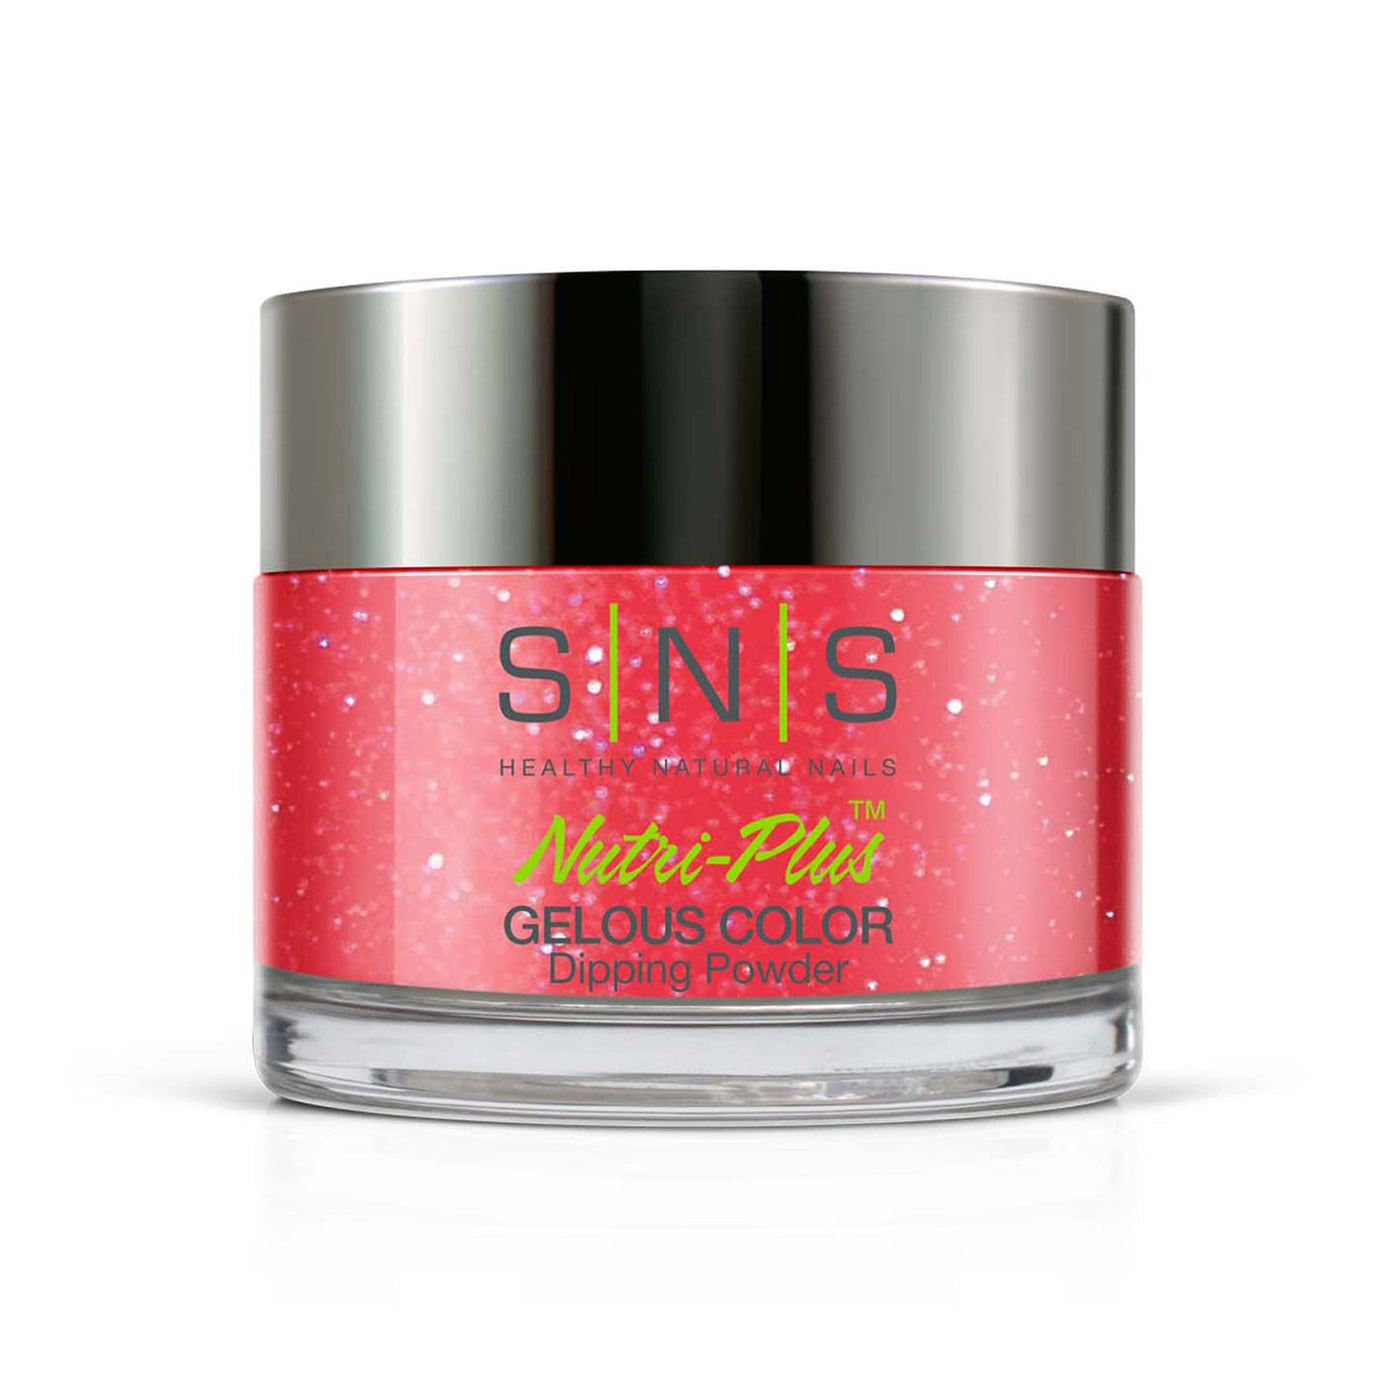 SNS Gelous Color Dipping Powder BD03 Gin & Tunic (43g) packaging